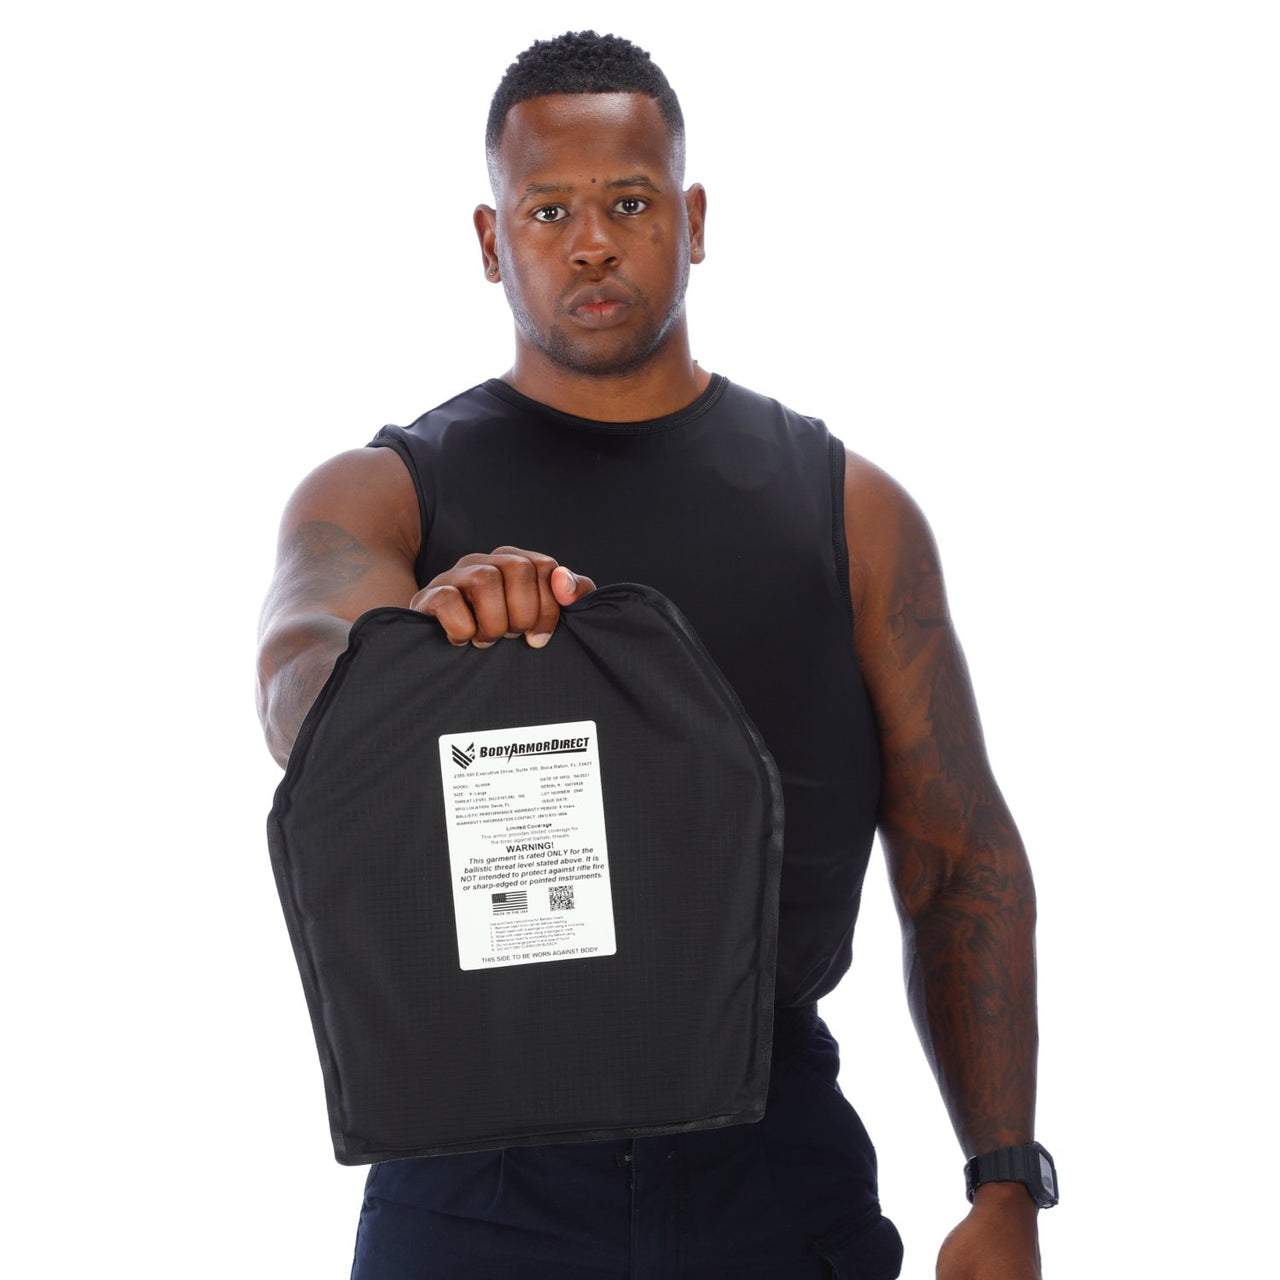 A man with tattoos holding a Body Armor Direct VIP T-Shirt Concealable Enhanced Multi-Threat plastic bag.